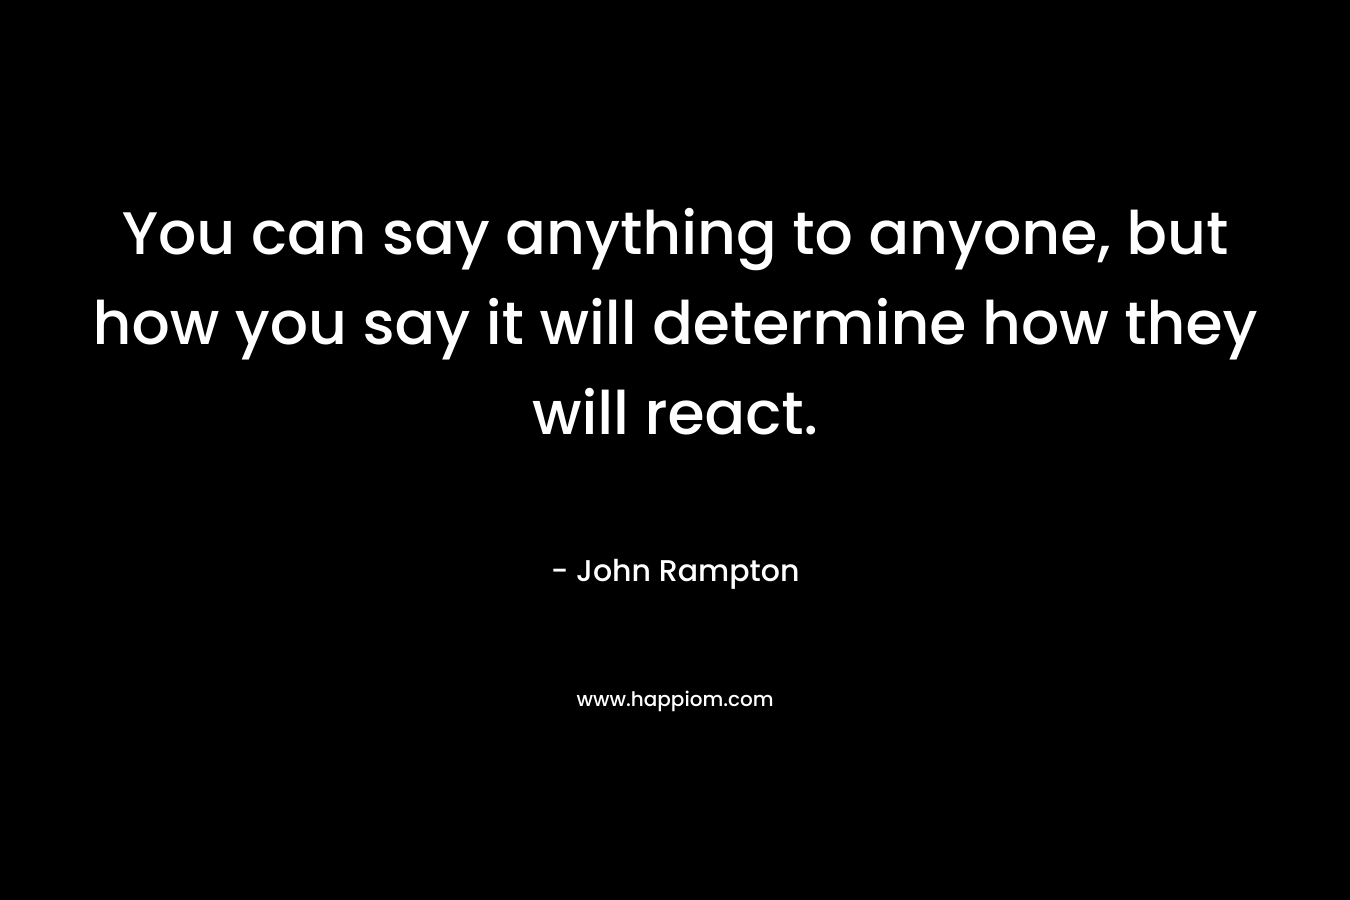 You can say anything to anyone, but how you say it will determine how they will react. – John Rampton